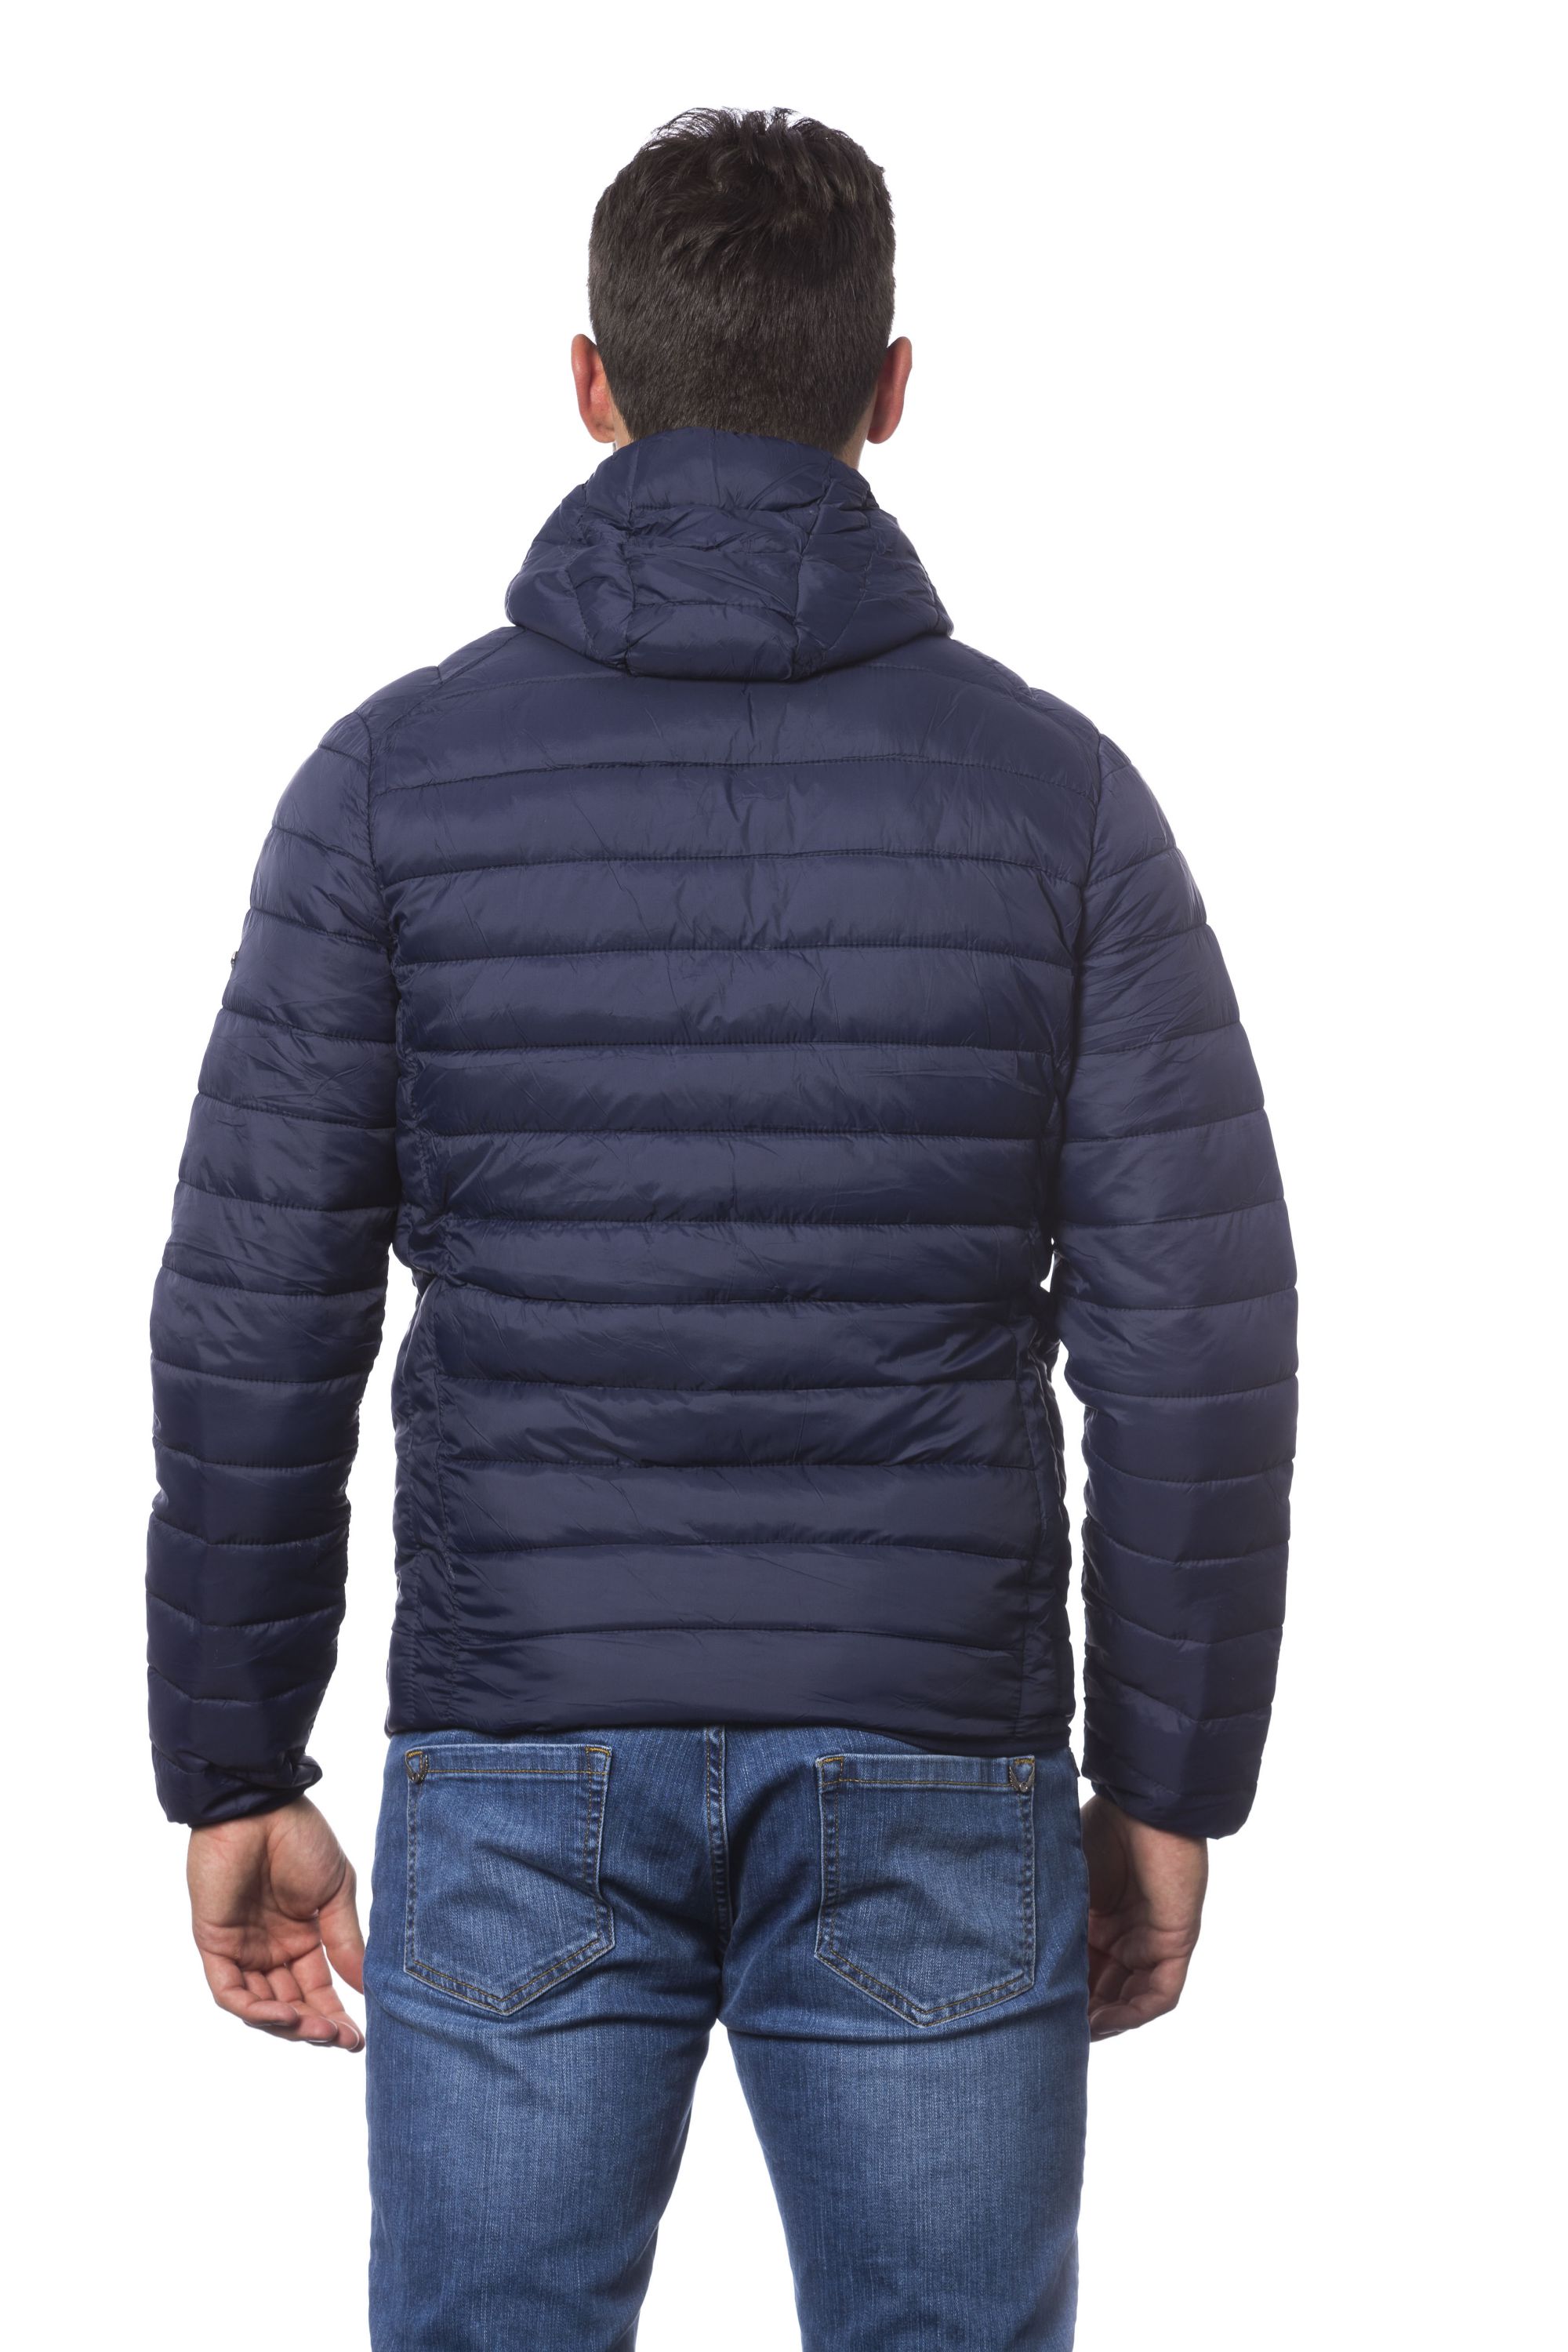 Trussardi Collection Mens Jackets EuropeStock offers | GLOBAL STOCKS